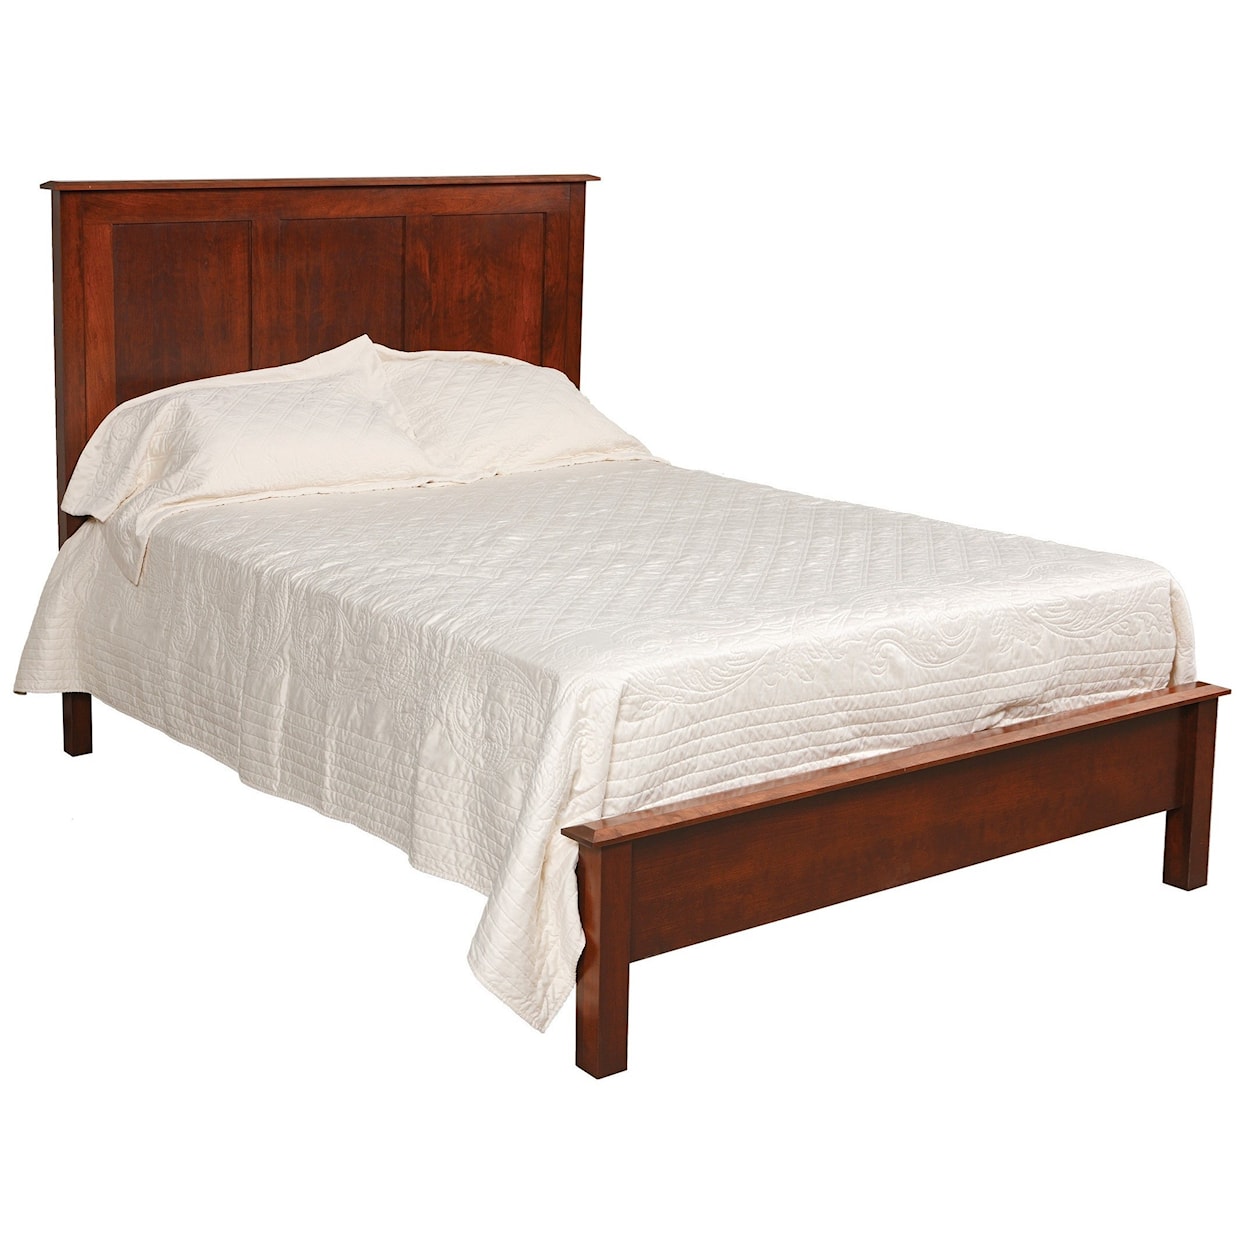 Daniel's Amish Manchester Solid Wood Queen Bed